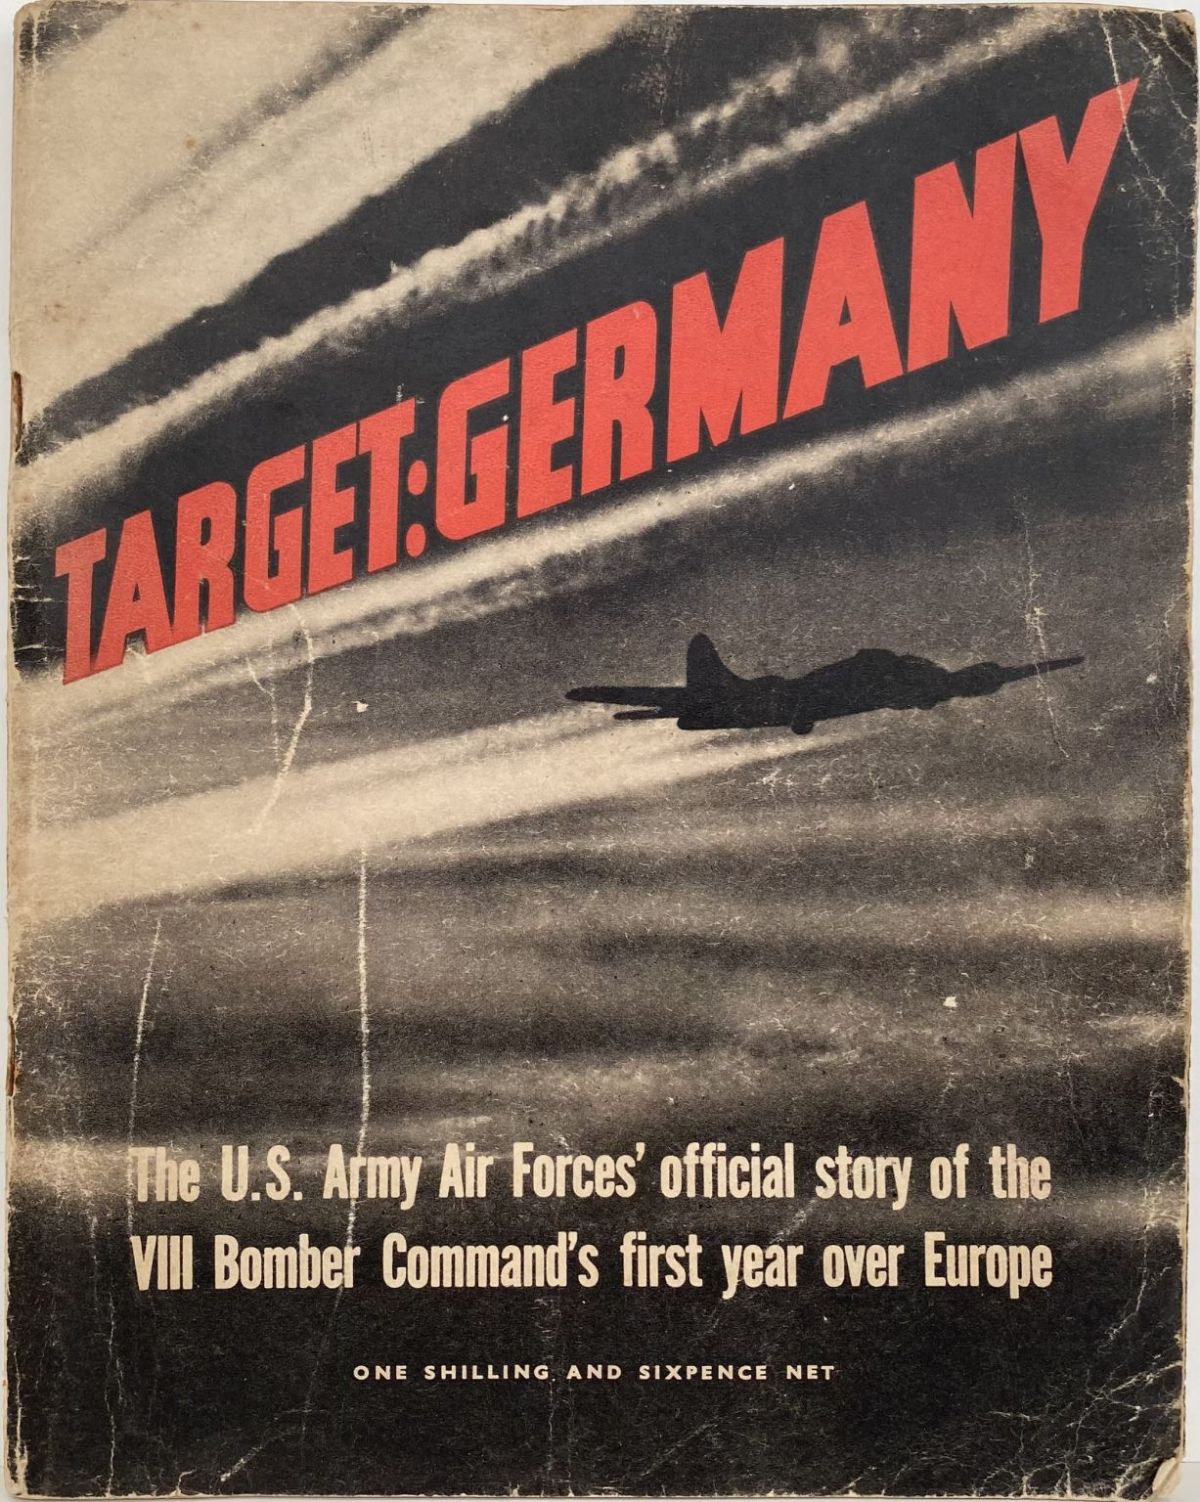 TARGET GERMANY: The VIII Bomber Command's First Year Over Europe